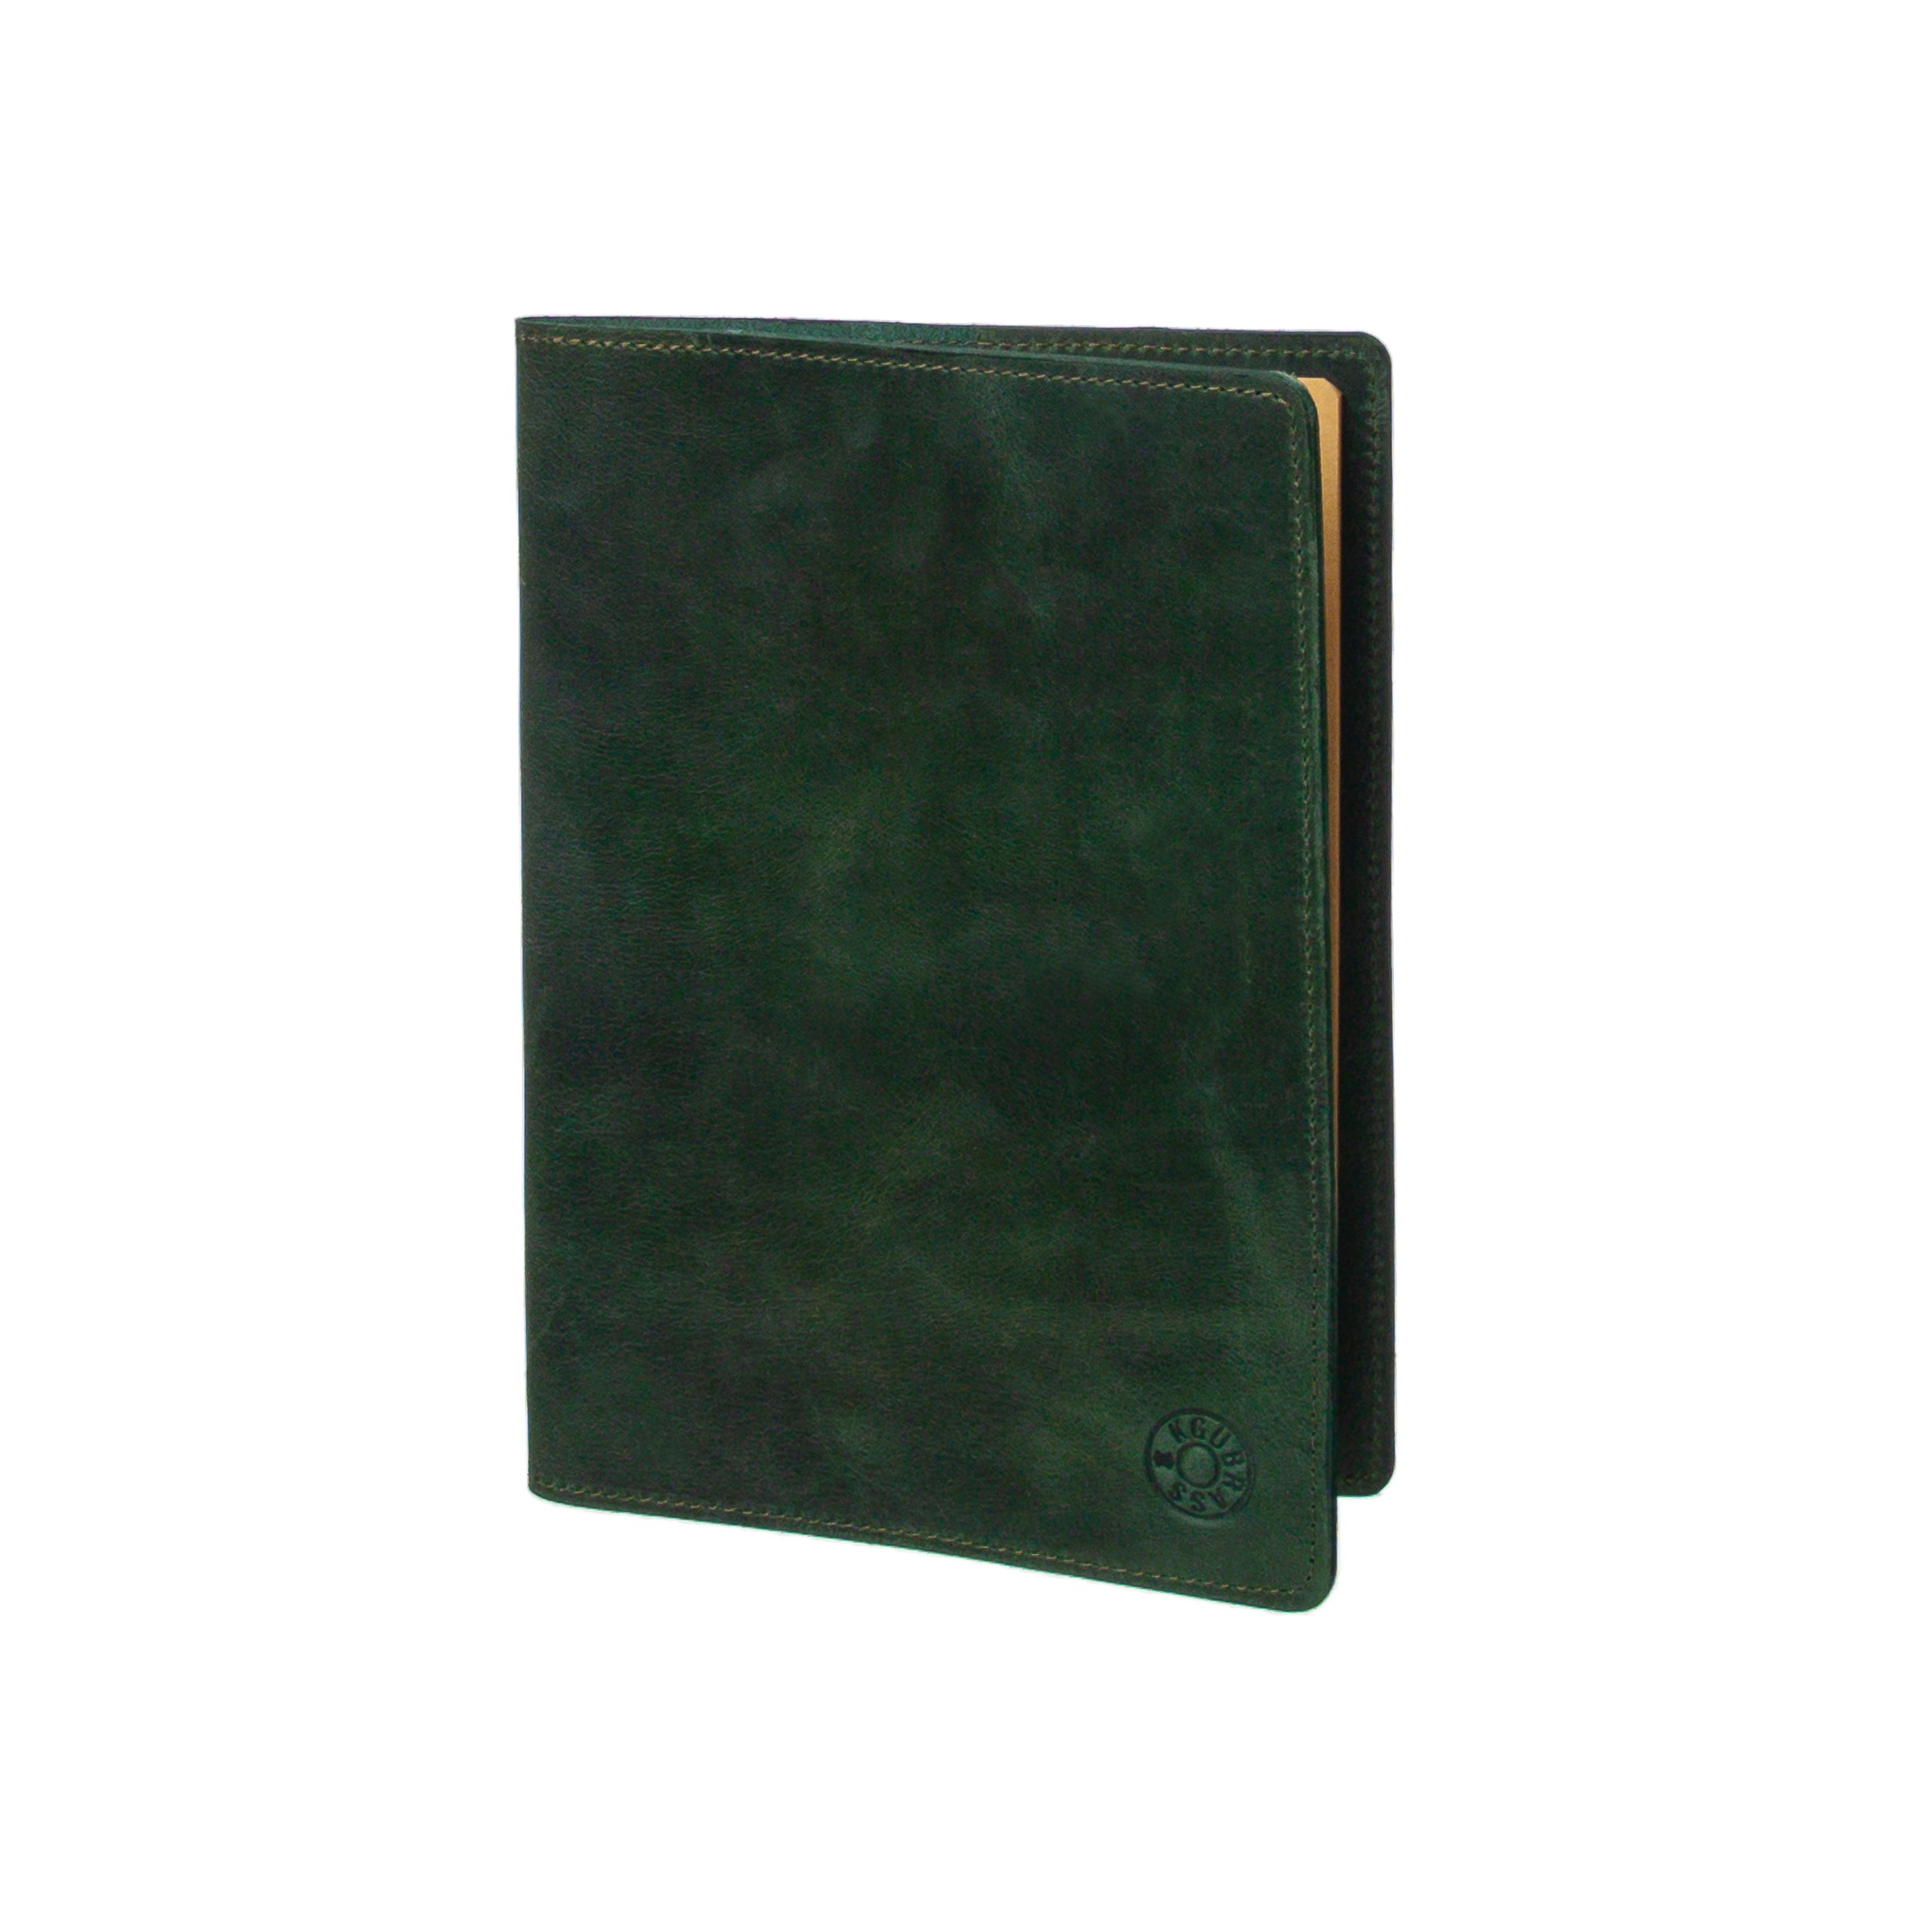 Music NoteBook with Leather Cover | KGUmusic